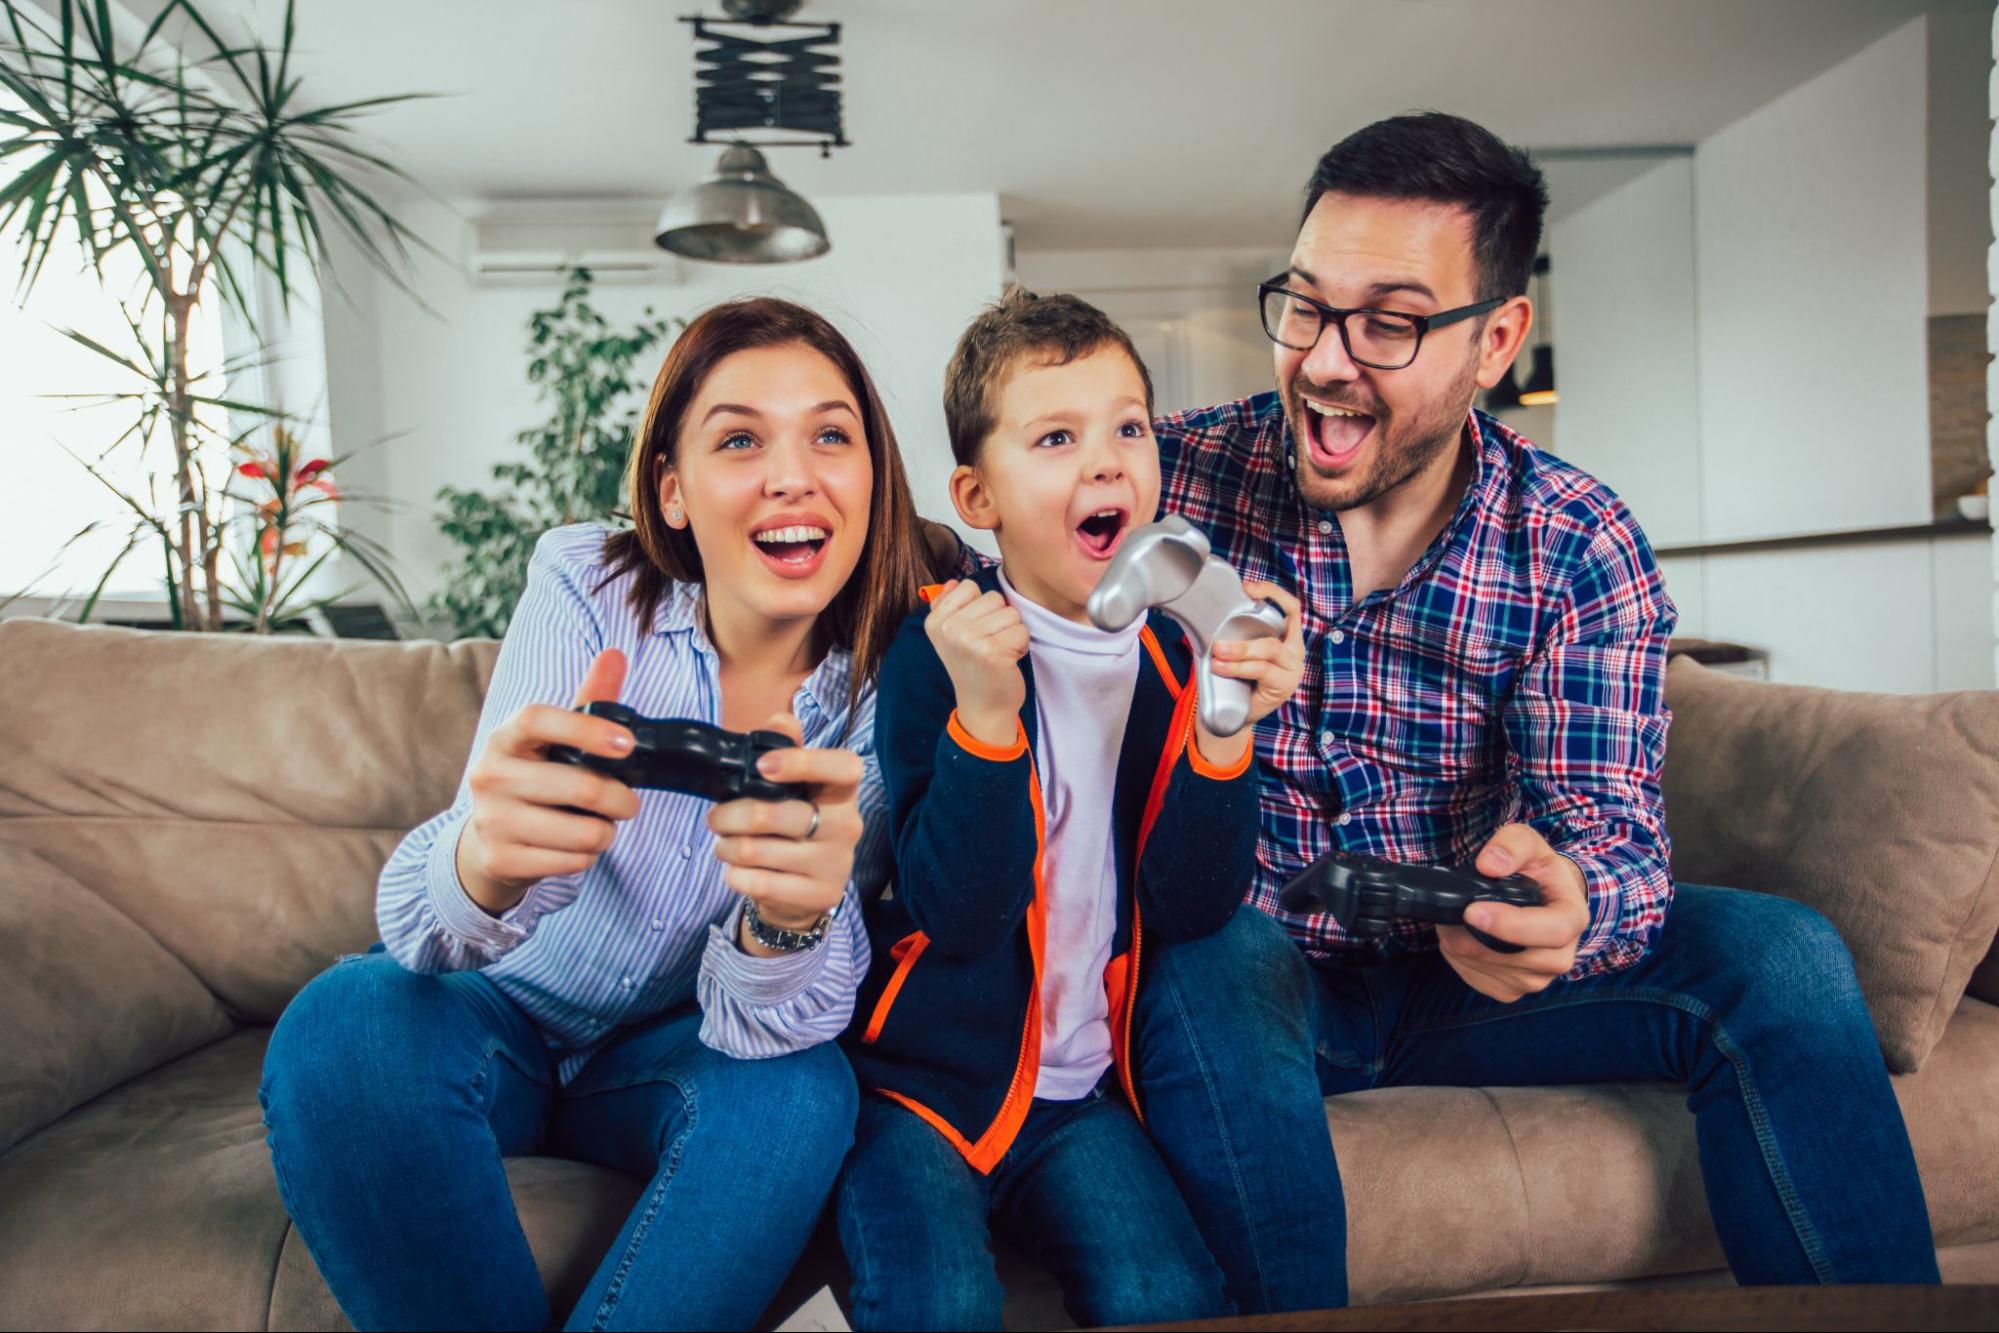 A family of three plays video games on consoles